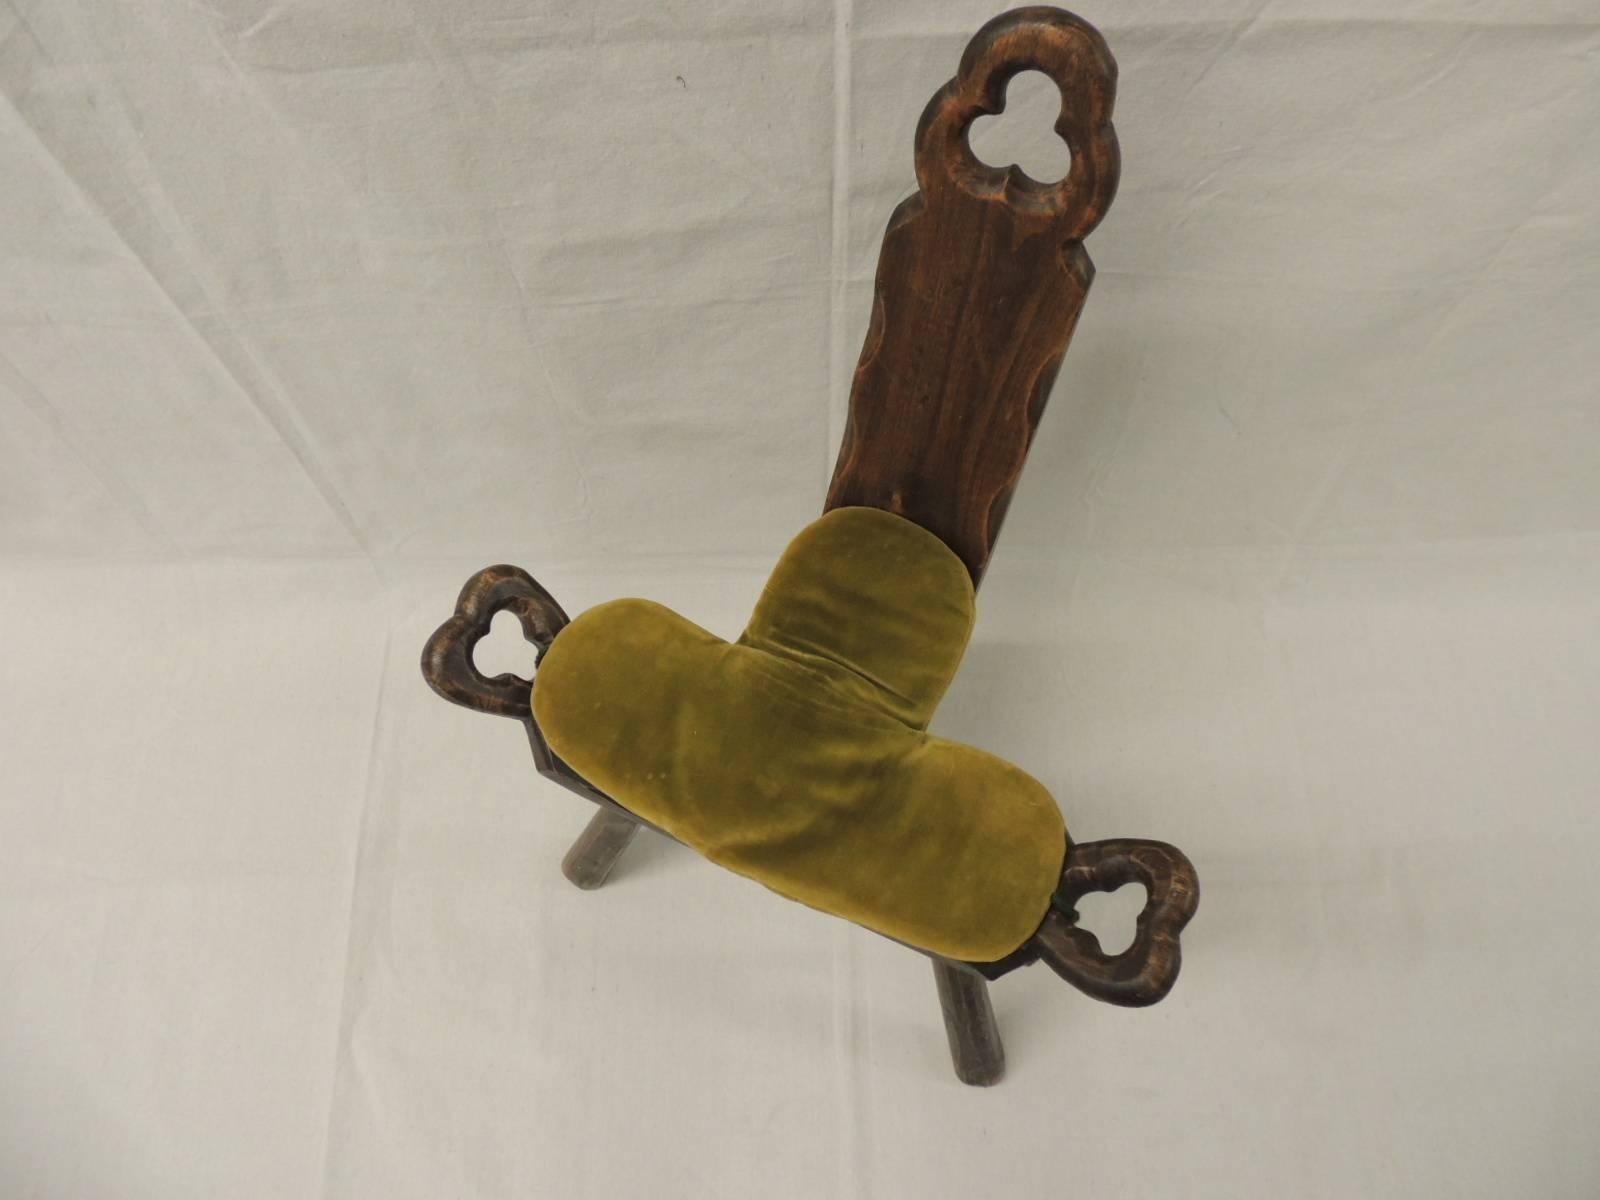 Vintage Primitive African birthing chair with antique green velvet cushion with tassels. Quatrefoil details on each side: “an ornamental design of four lobes or leaves as used in architectural tracery, resembling a flower or four-leaf clover.”